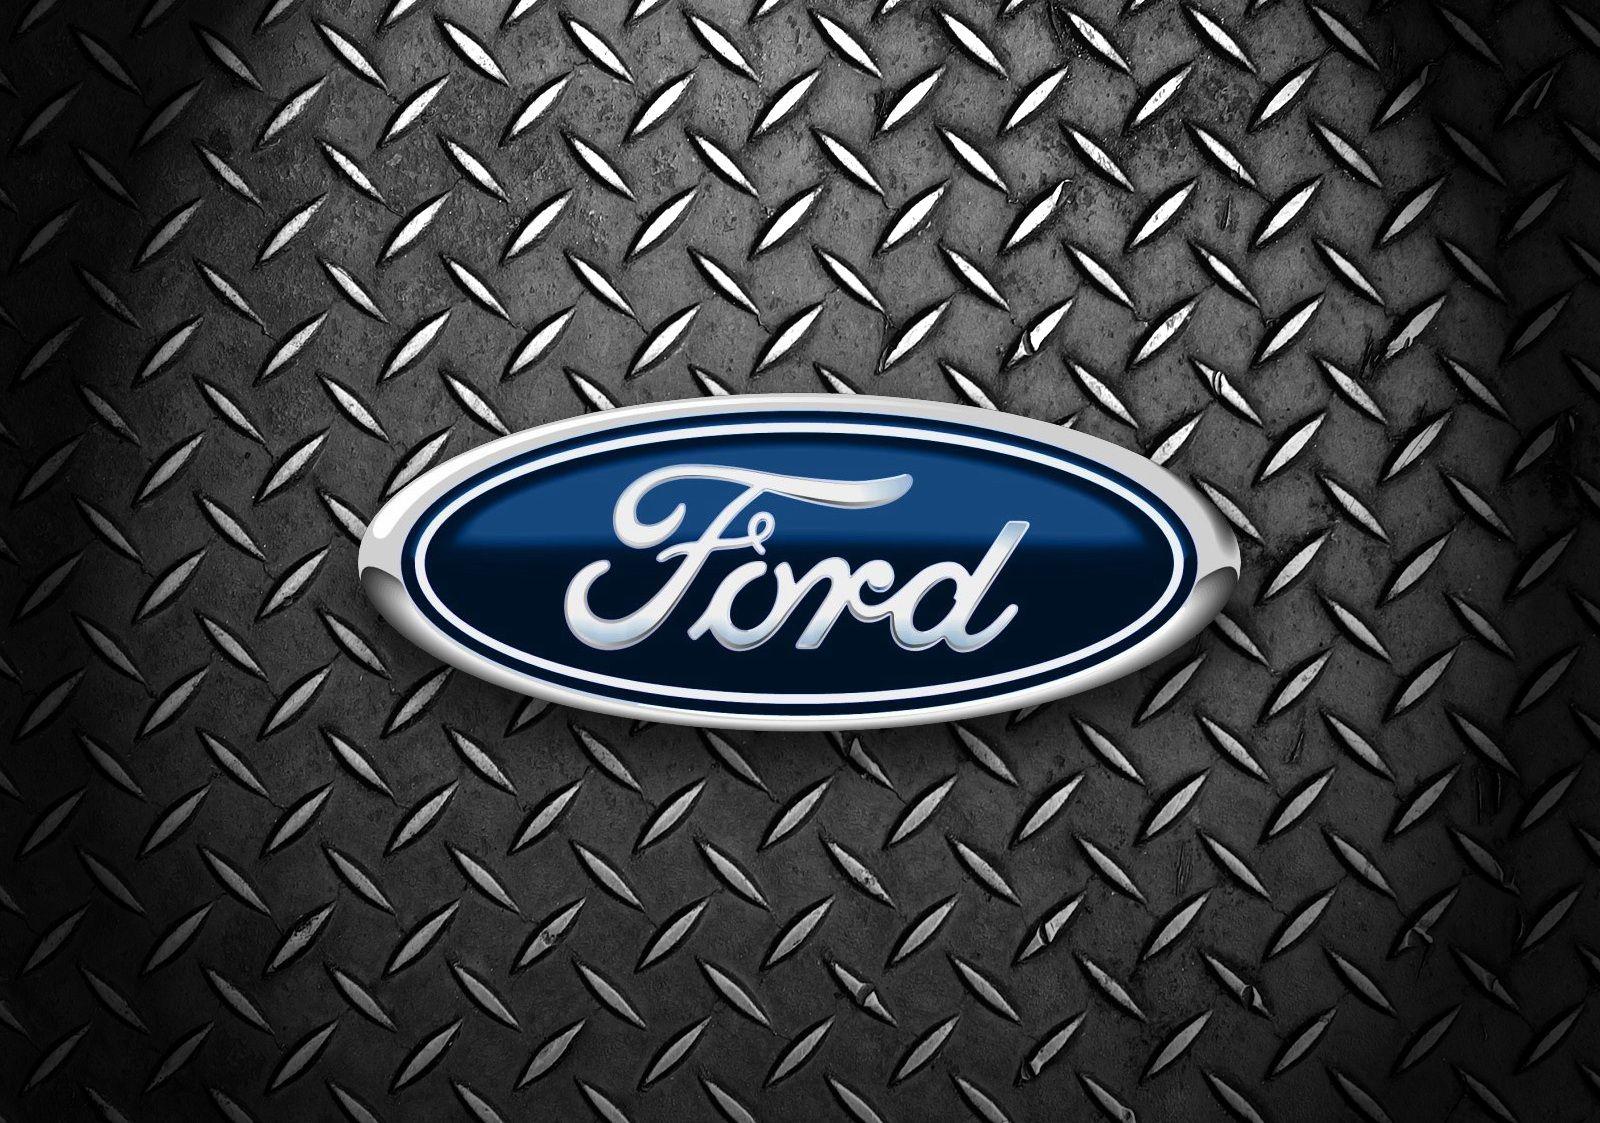 Brand with Blue Oval Logo - Ford Logo, Ford Car Symbol Meaning and History | Car Brand Names.com